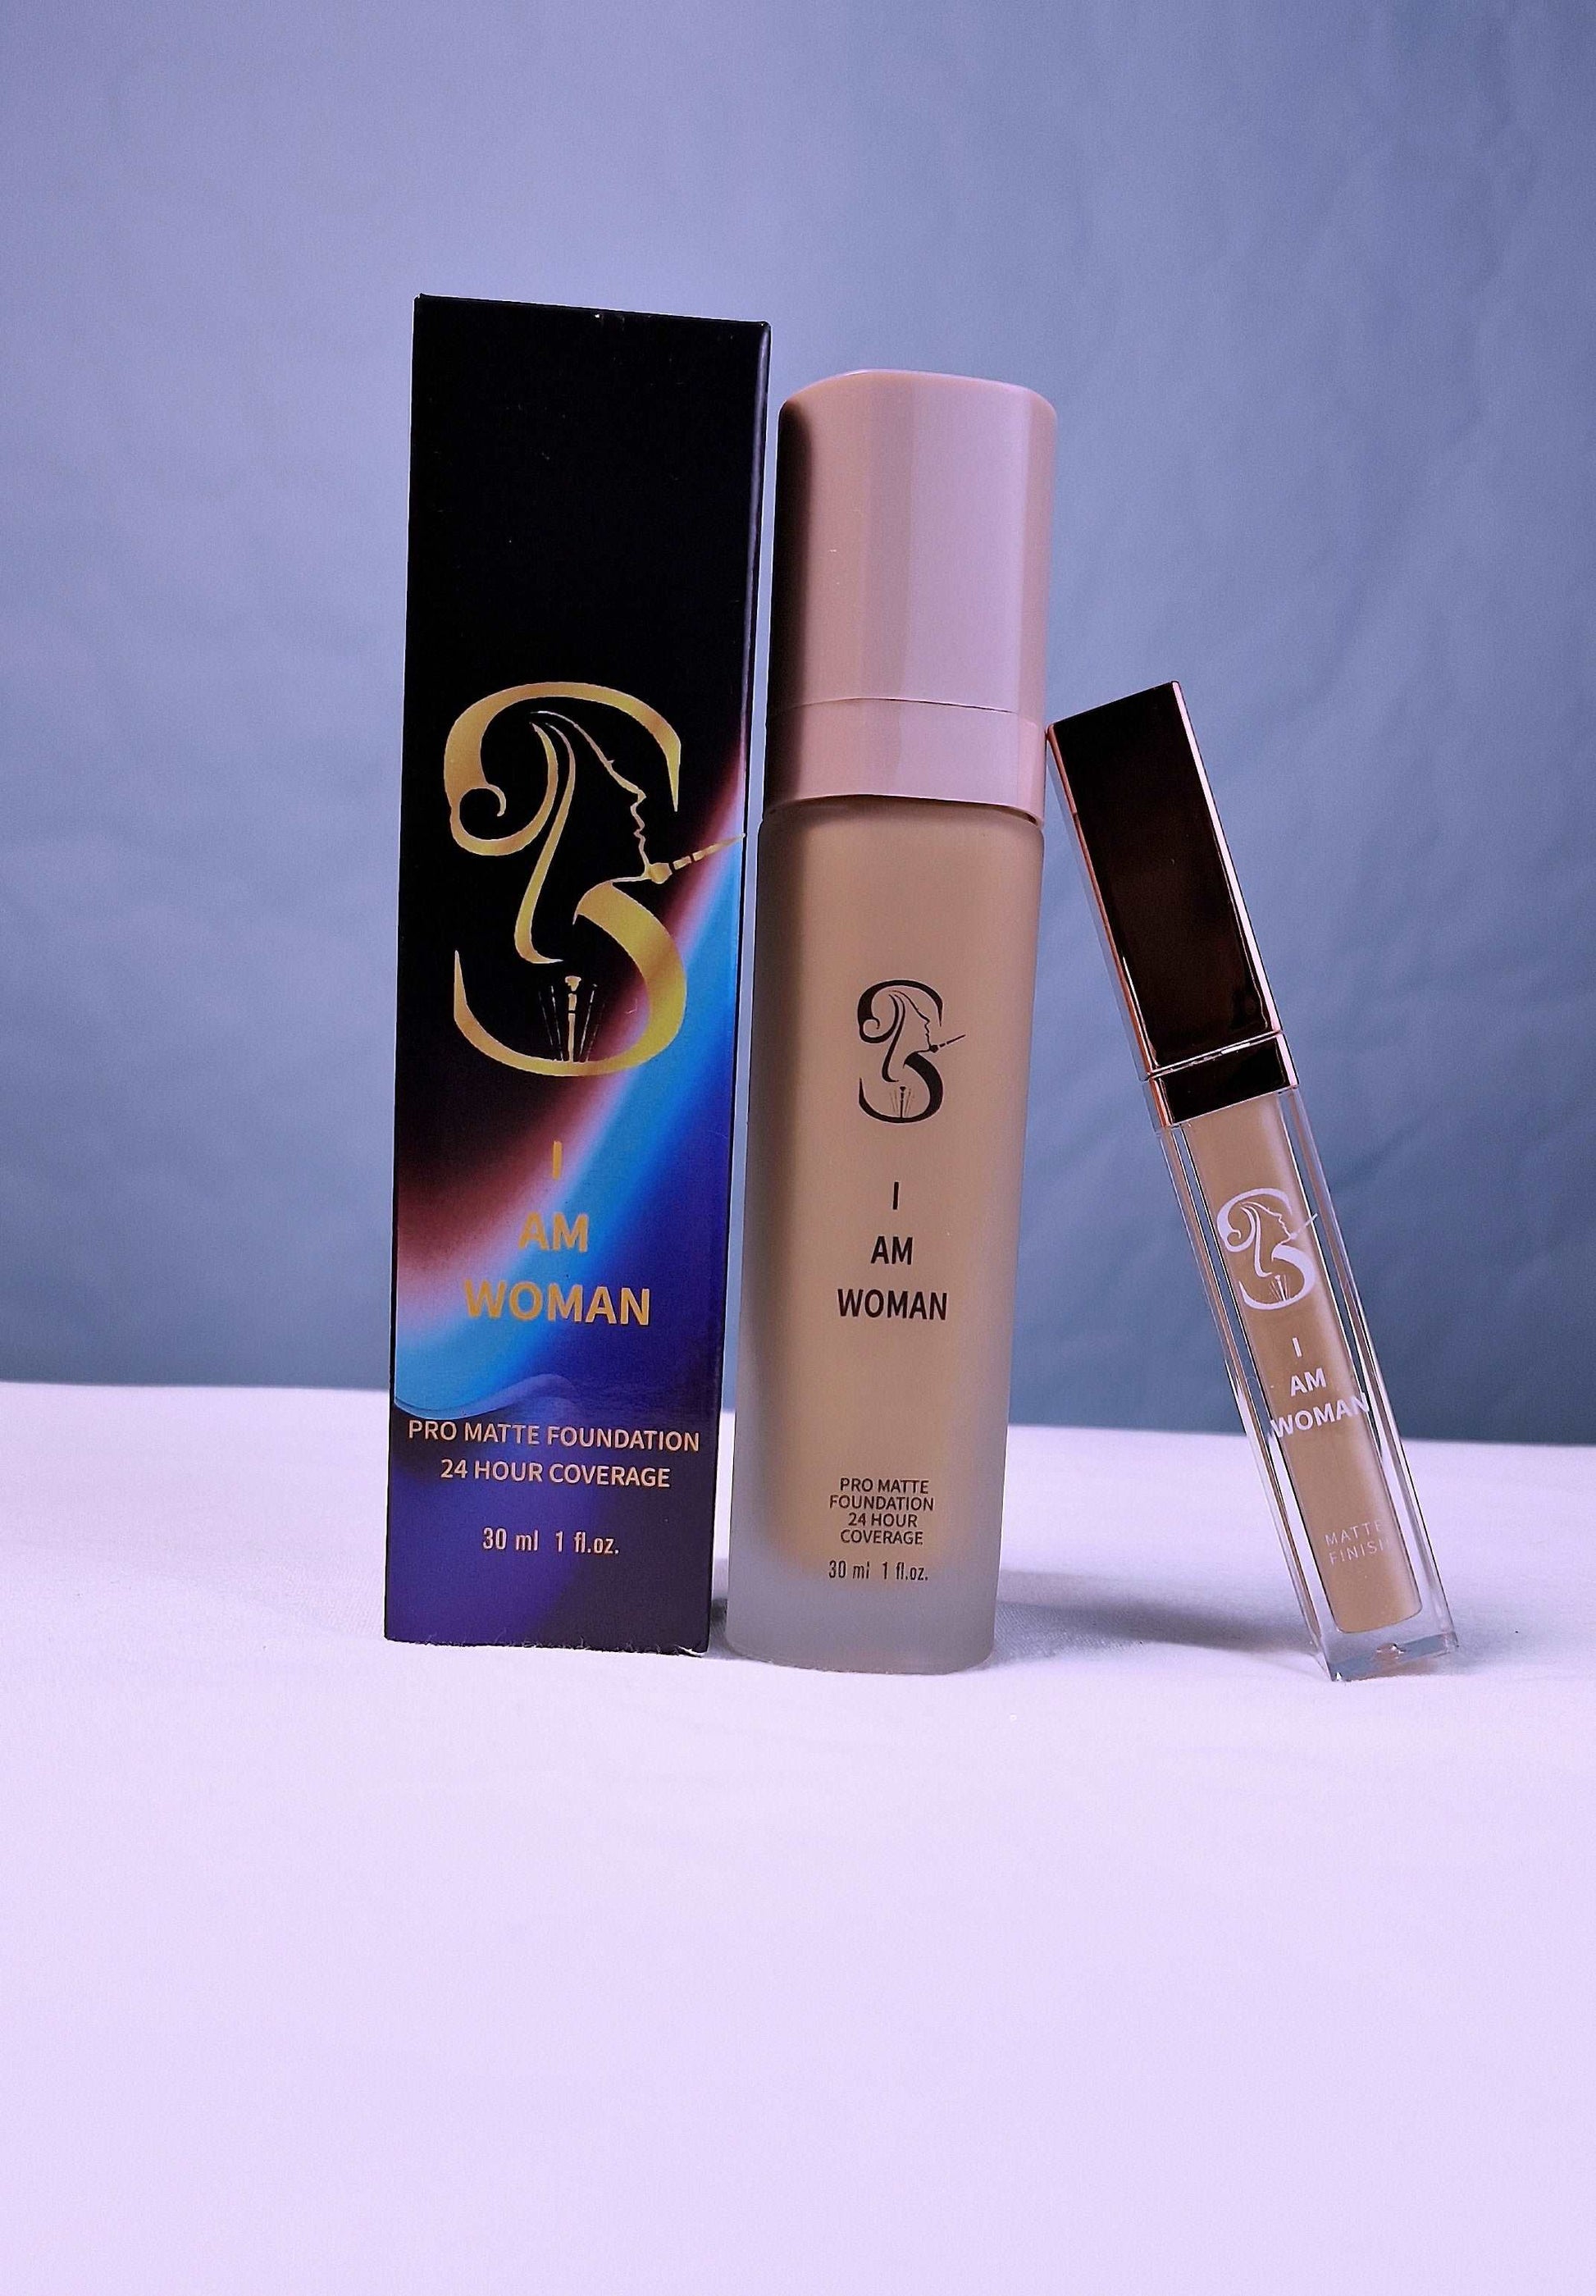 I AM WOMAN ~ Ultra Matte Vegan Full Coverage Concealer For Oily&Combination skin types- I AM WOMAN -Correttore vegano ultra opaco a copertura totale per pelli grasse e miste - SANDY'S MAKEUP AND ARTISTRY 